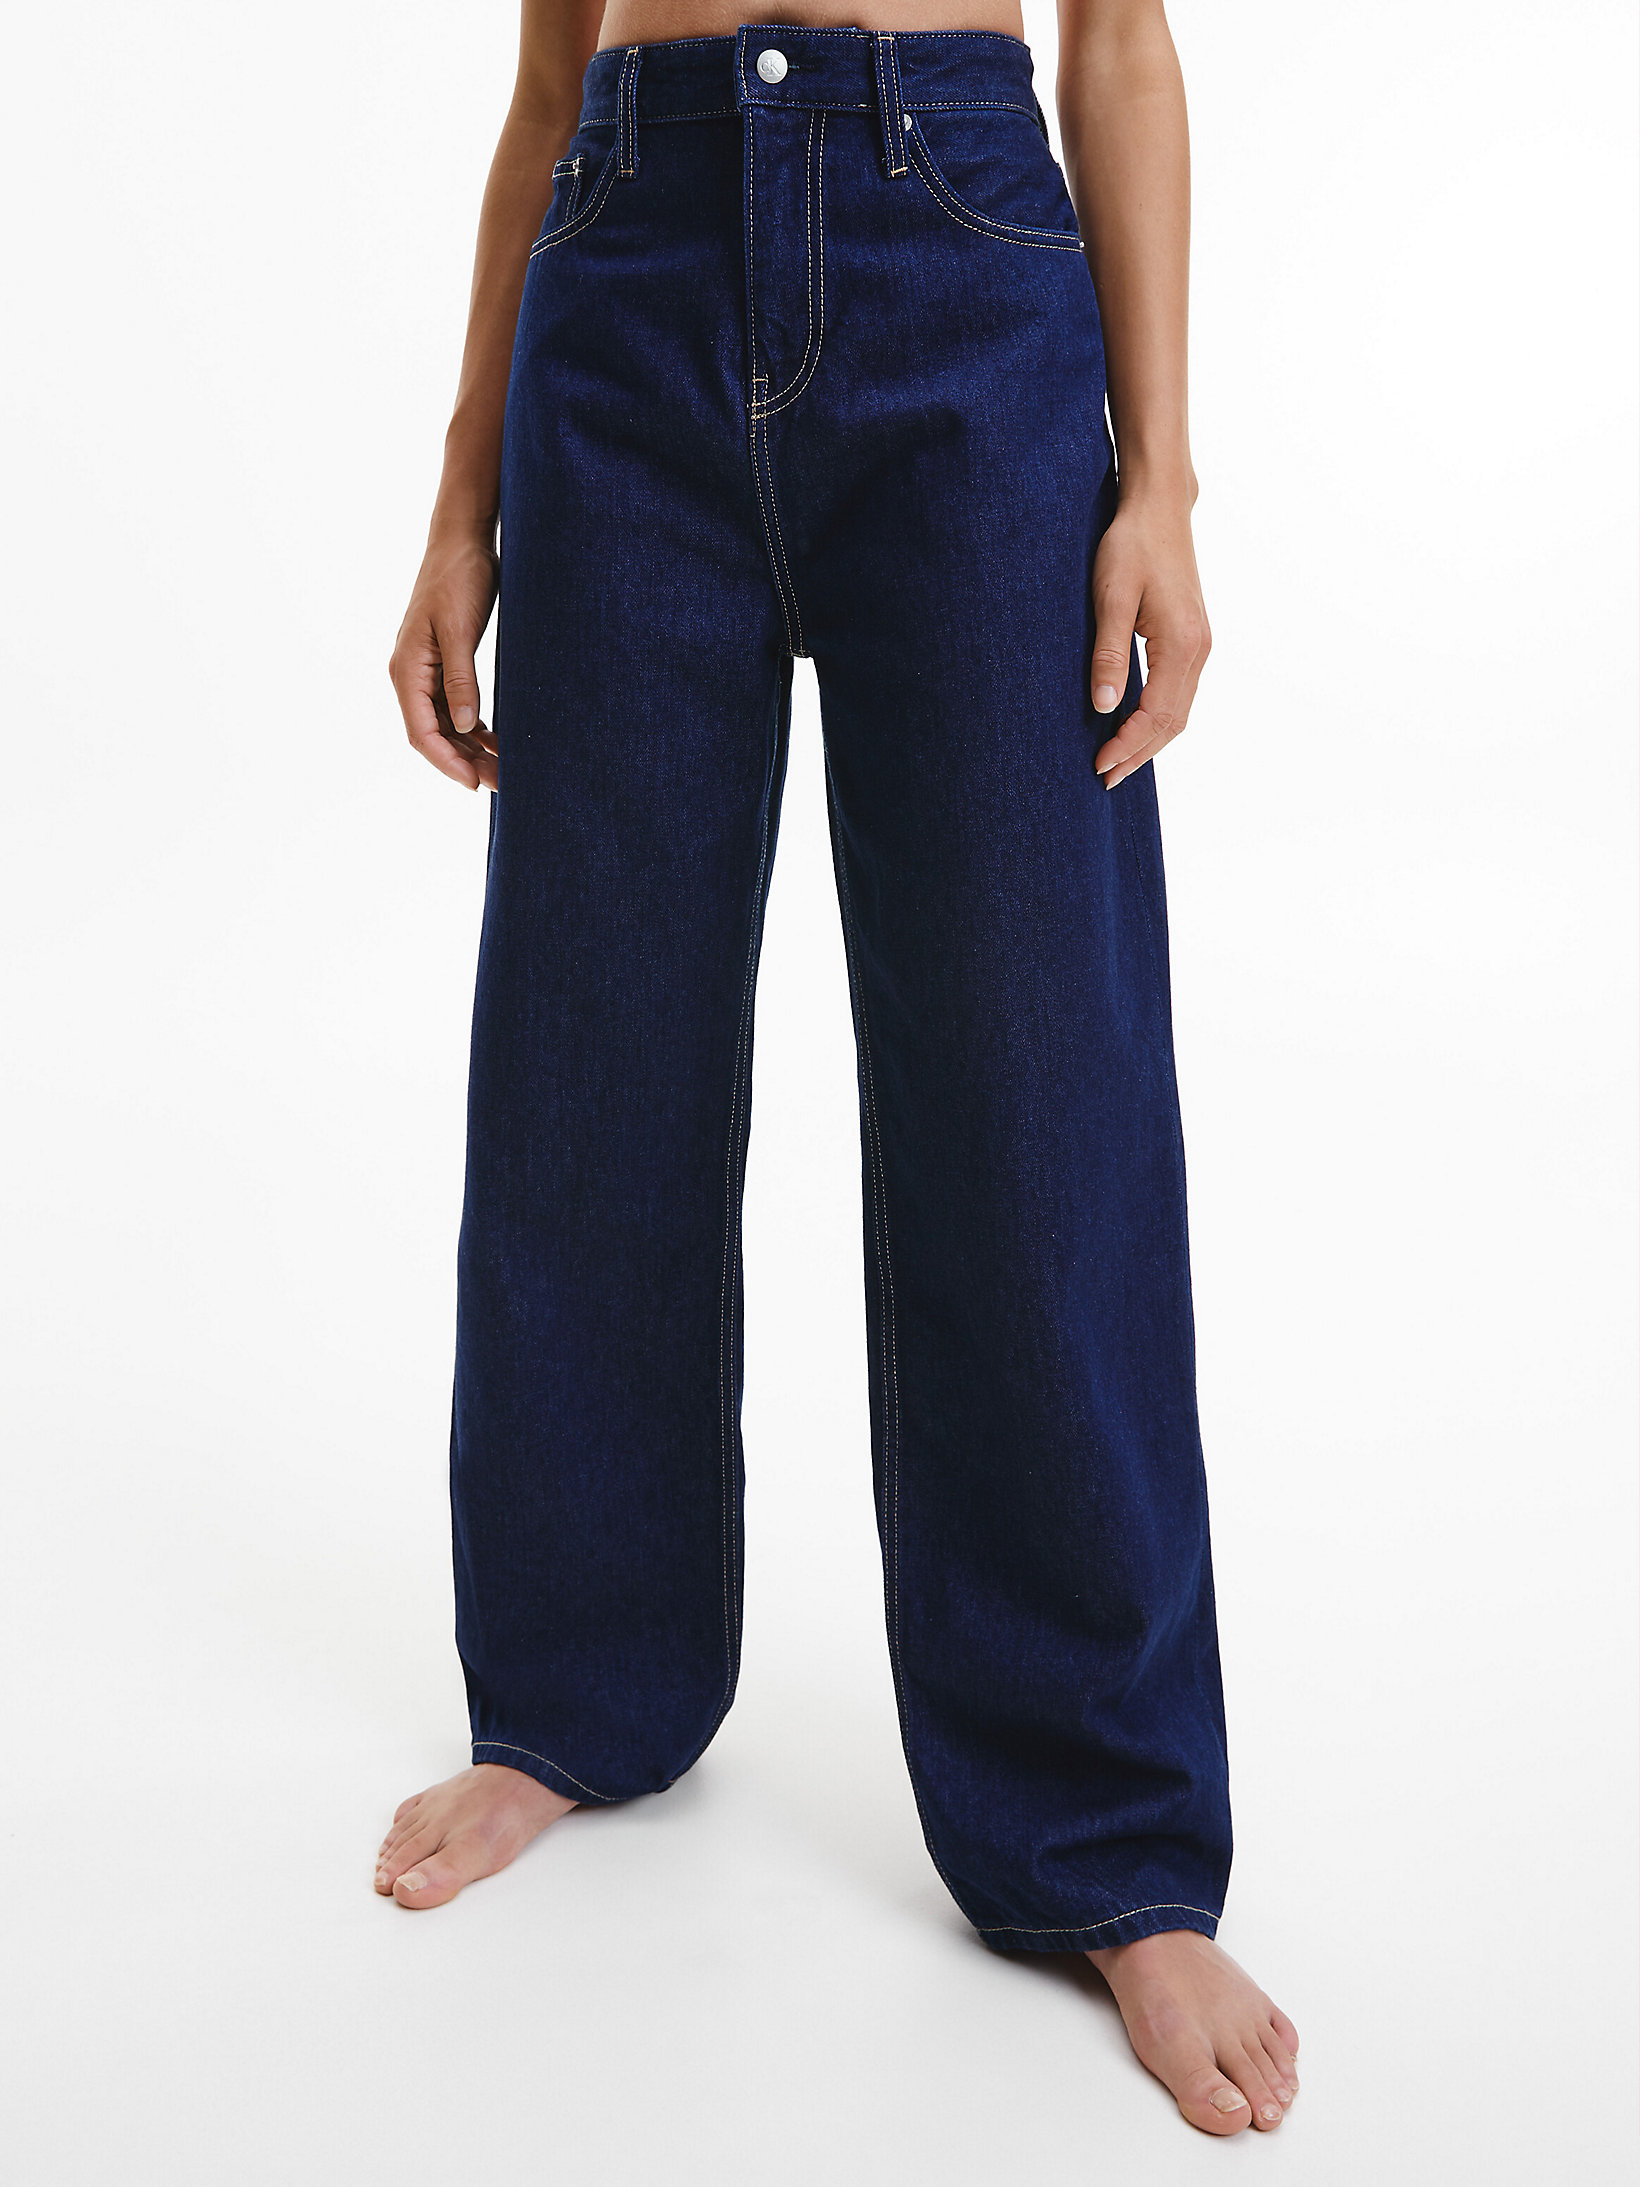 Denim Rinse High Rise Relaxed Jeans undefined women Calvin Klein